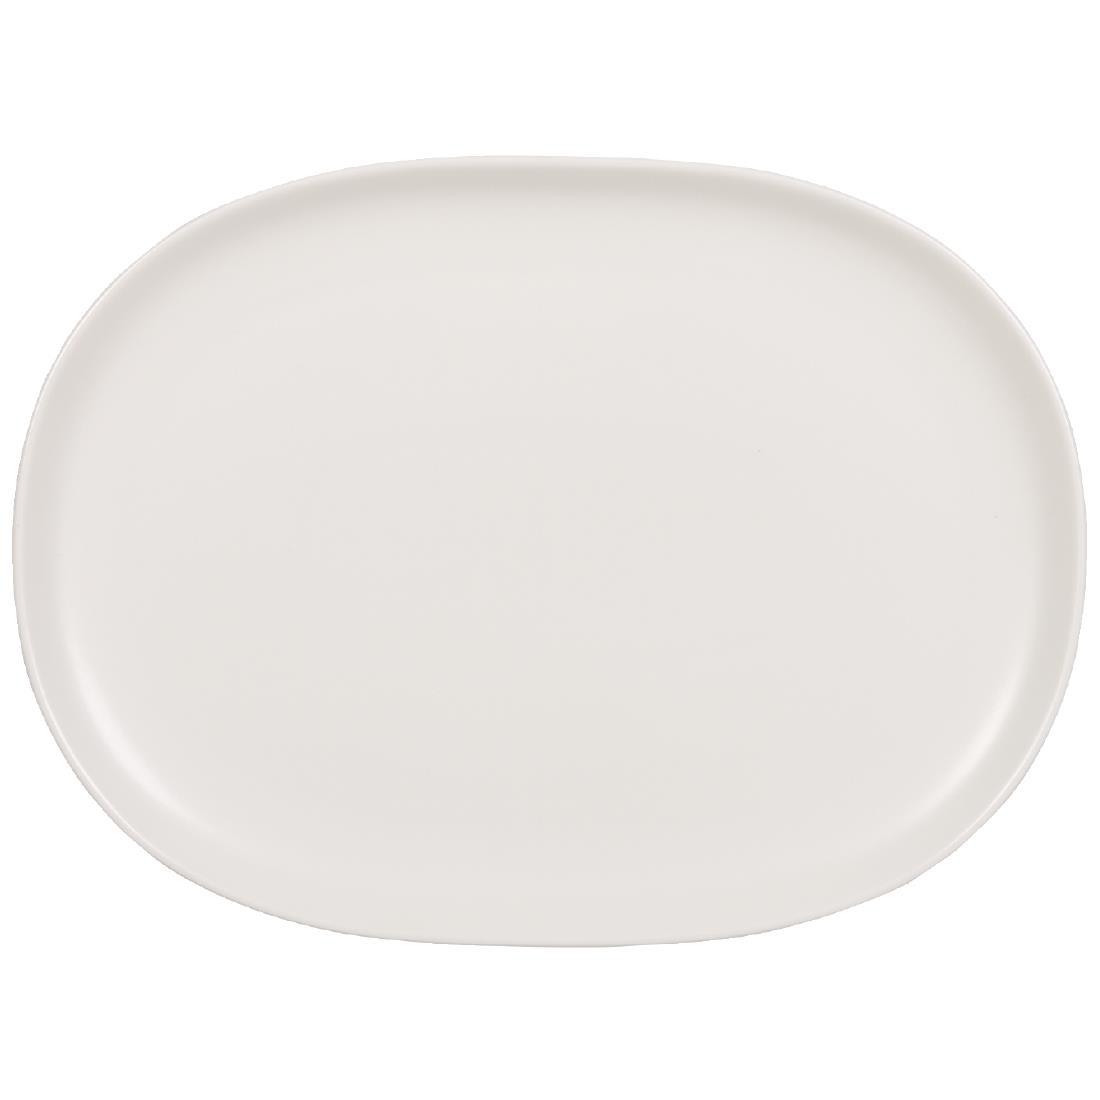 Churchill Alchemy Moonstone Oval Plates 225mm (Pack of 12) - DN517  - 1